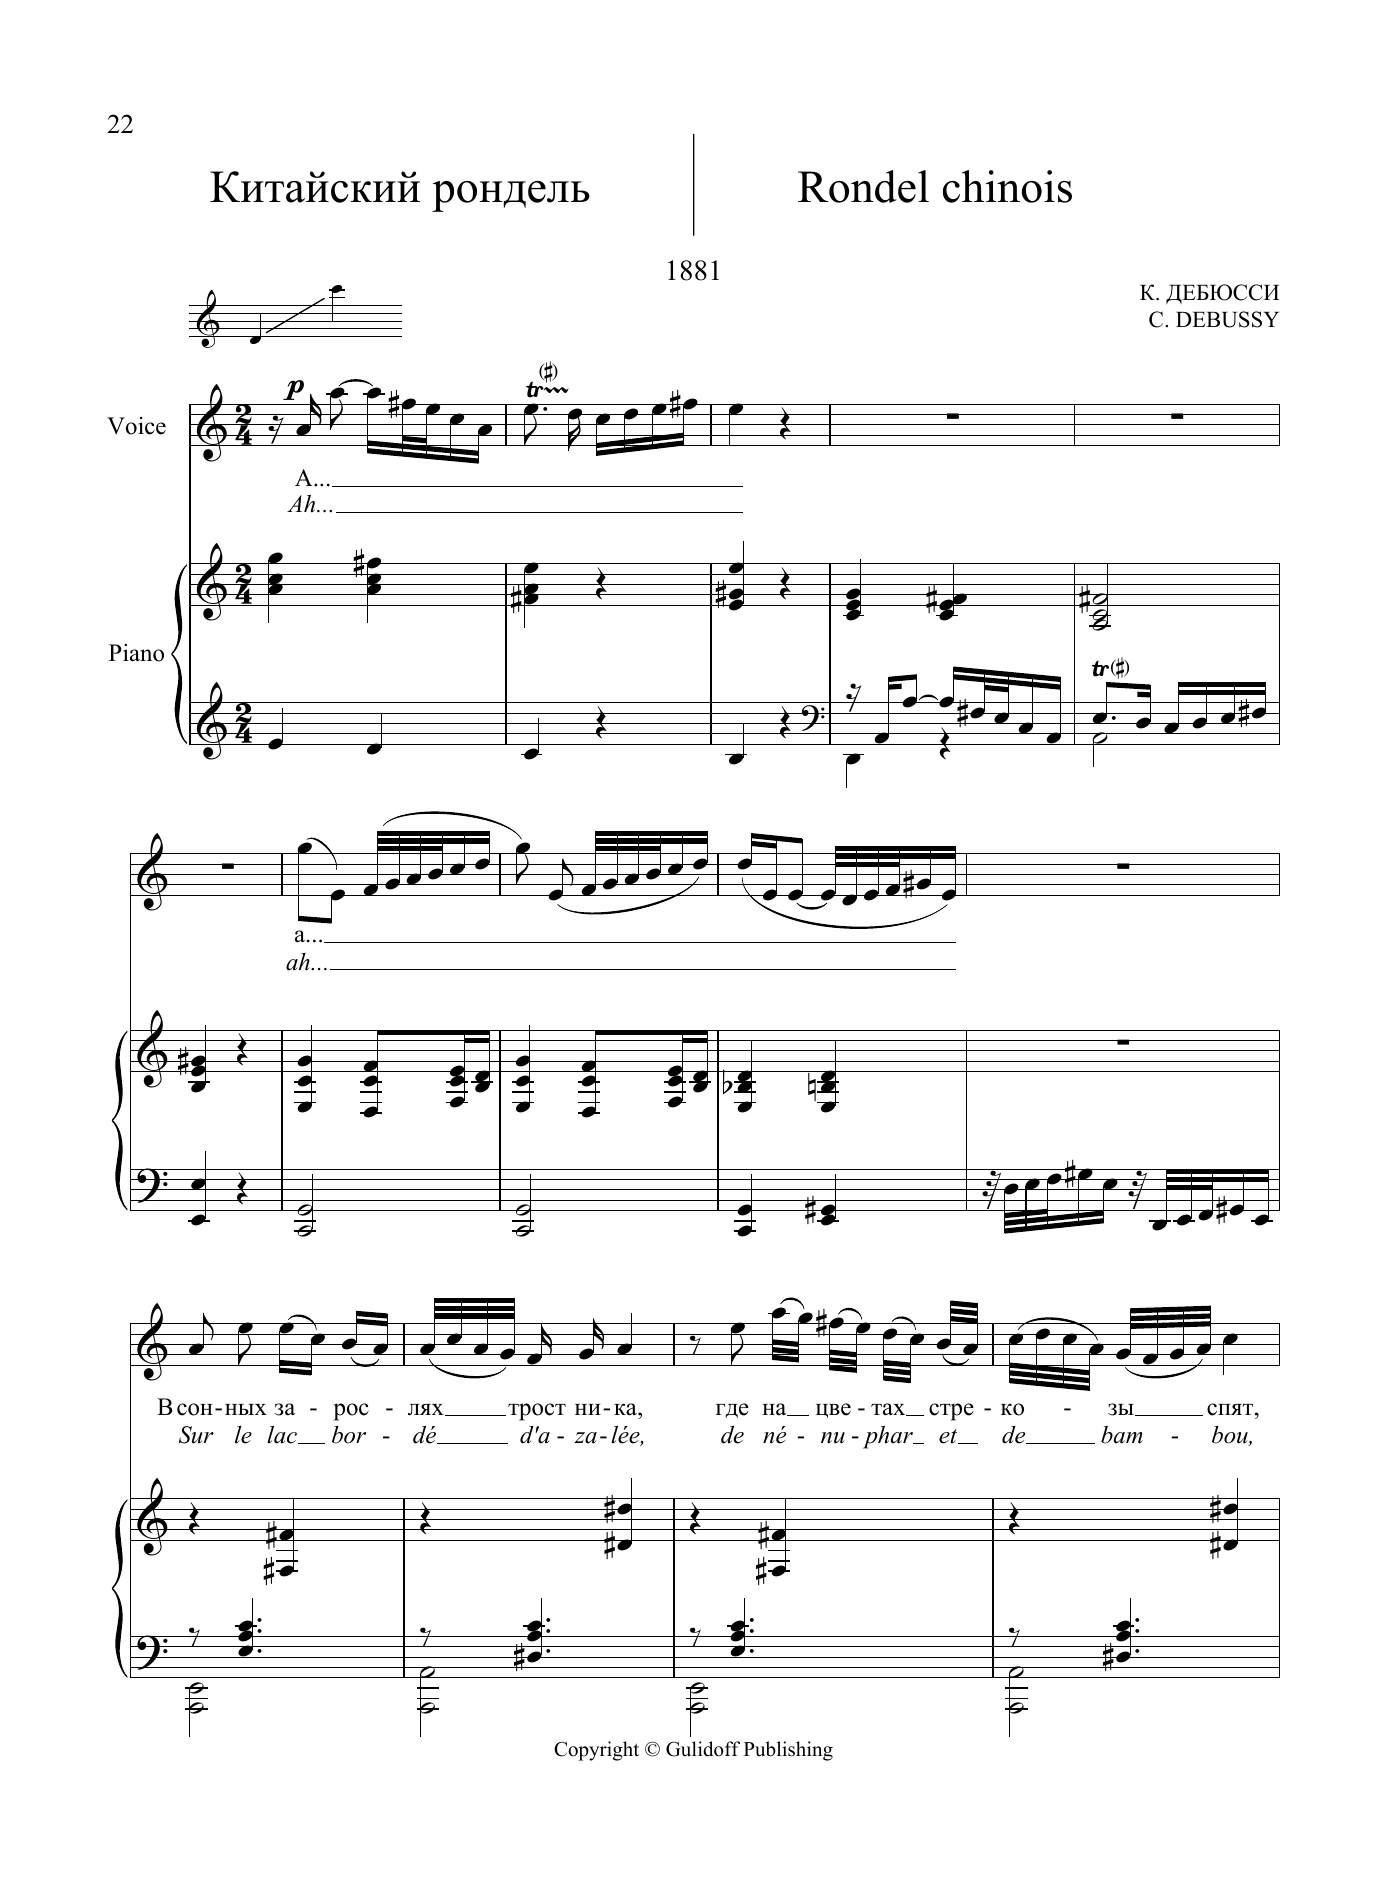 Download Claude Debussy 20 Songs Vol. 1: Rondel Chinois Sheet Music